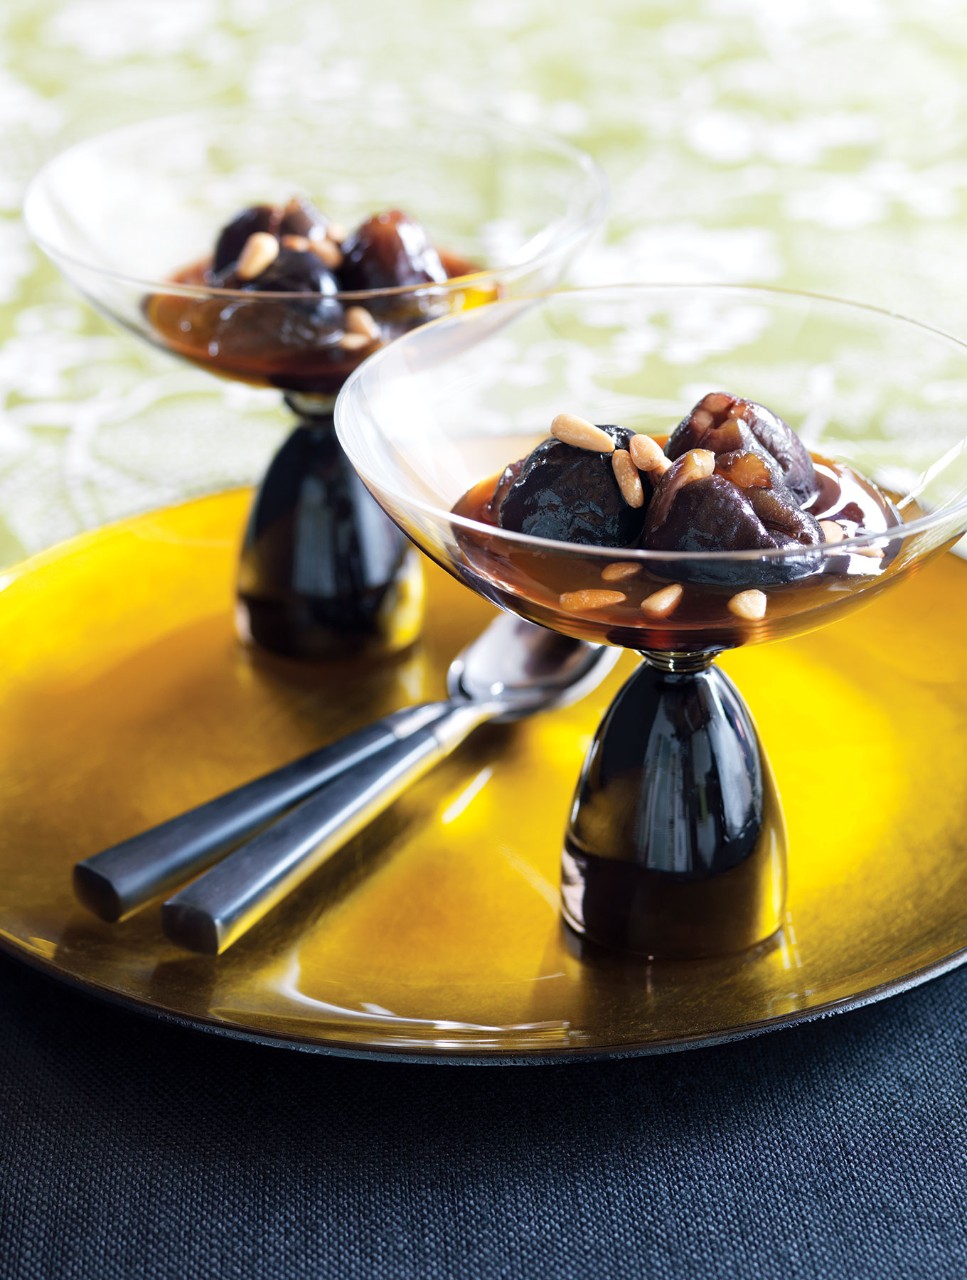 Balsamic Vinegar Caramelized Figs with Toasted Pine Nuts